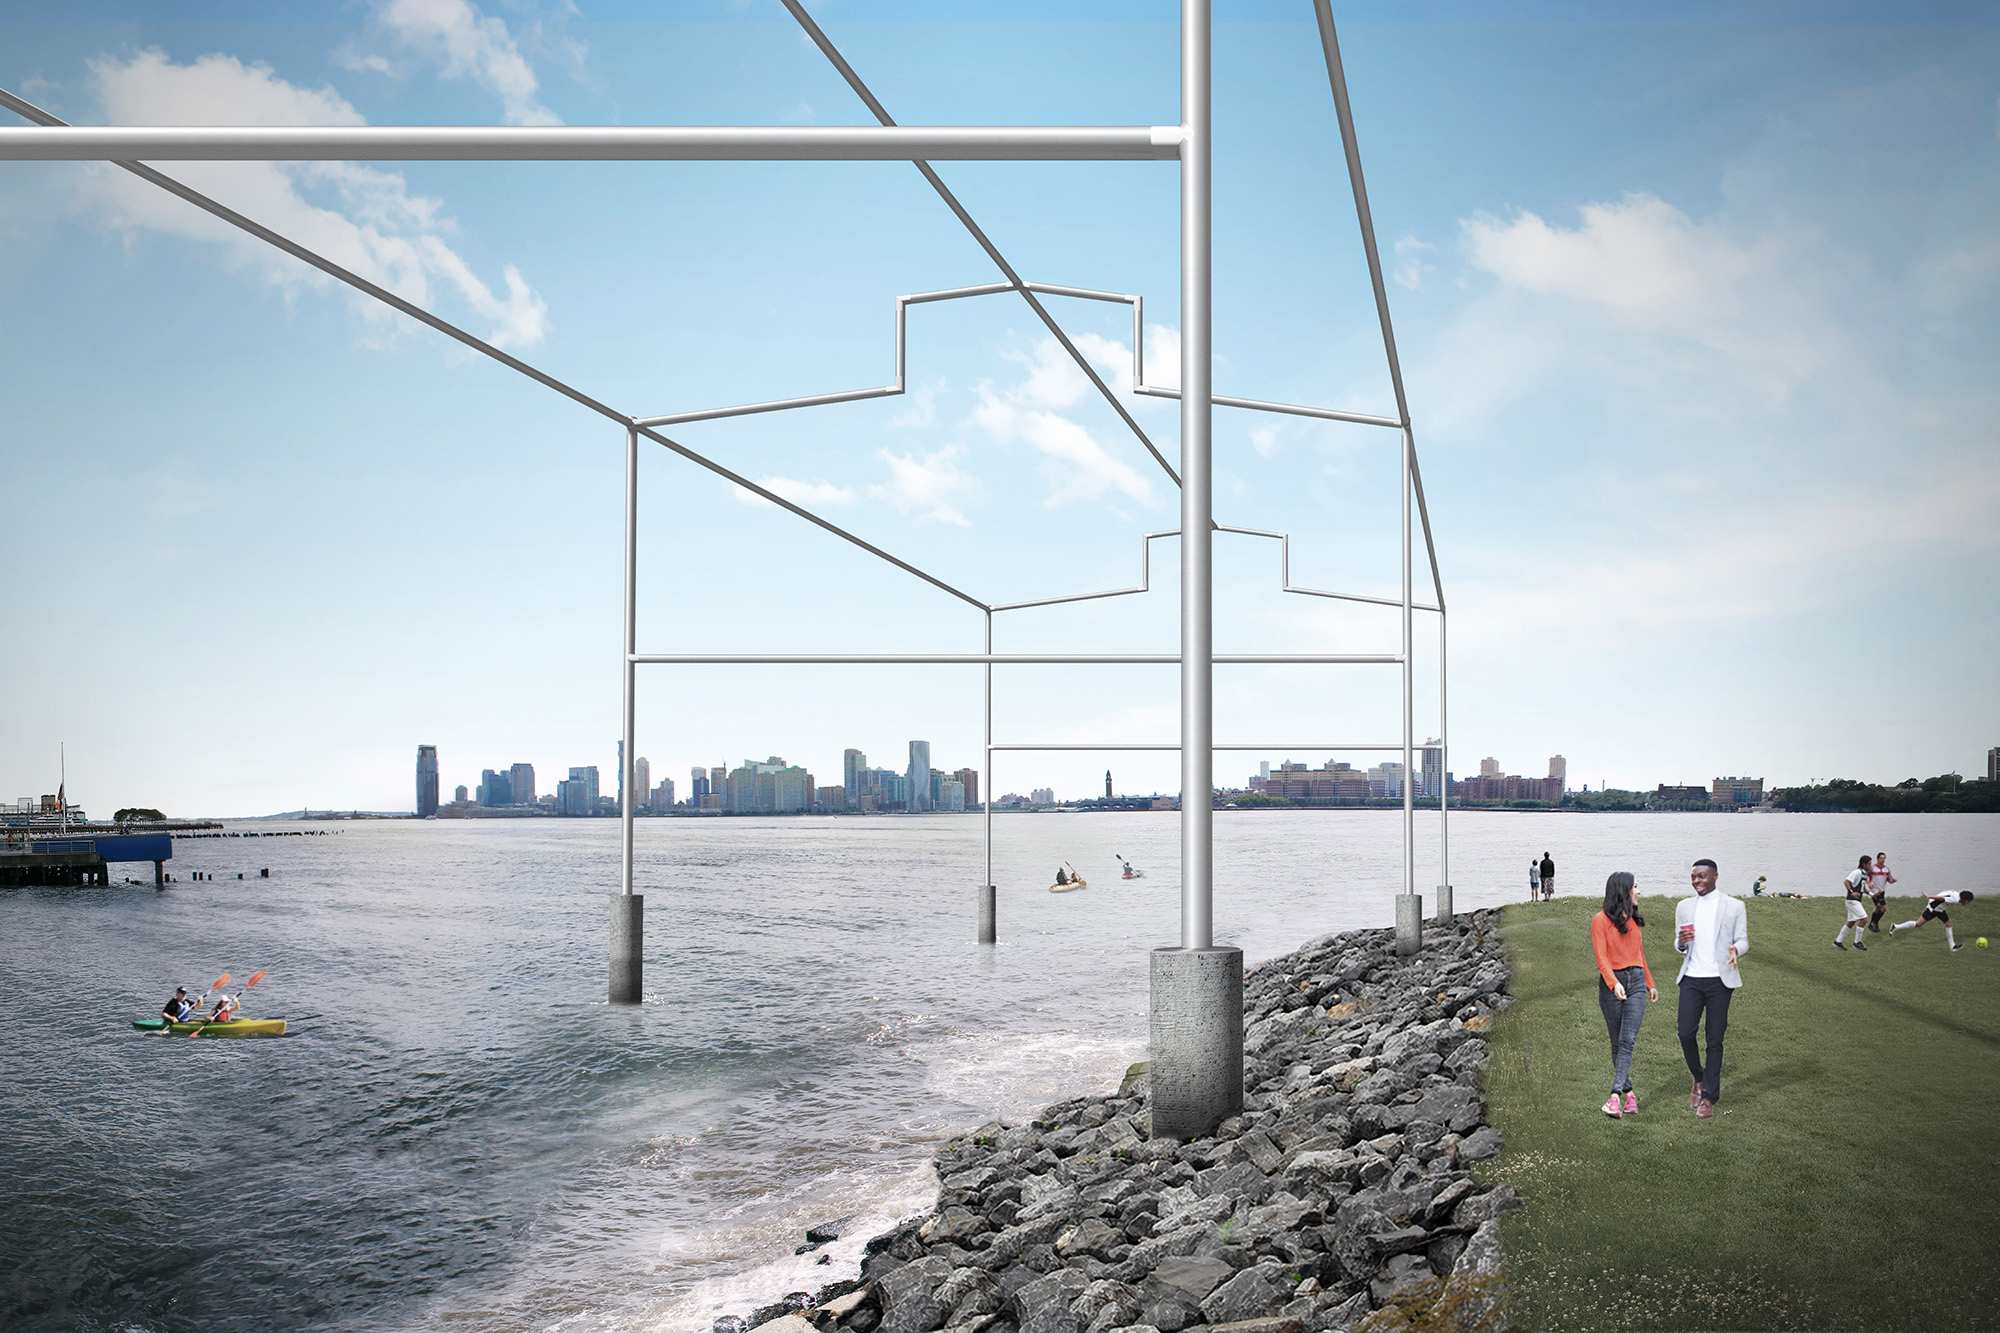 Rendering of the proposed project, Day's End by David Hammons, looking west from Gansevoort Peninsula. Courtesy Guy Nordenson and Associates.